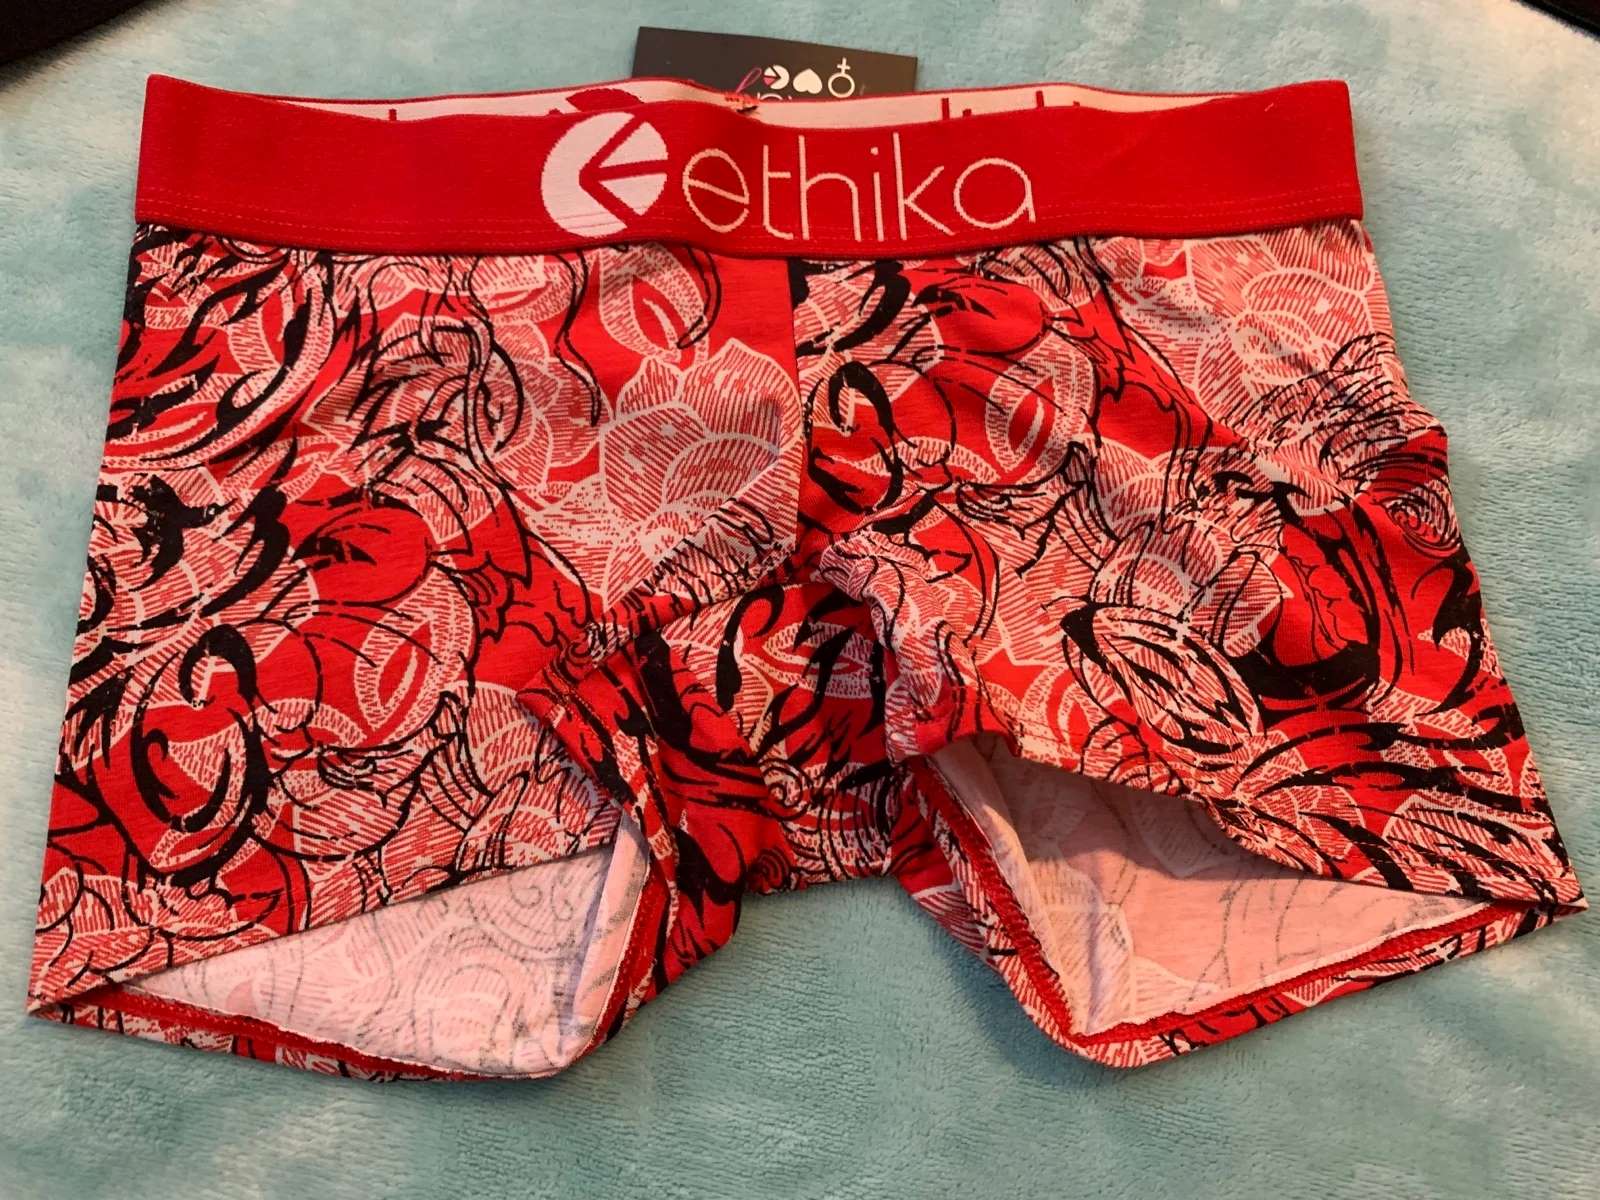 What Is Ethika Underwear Made Of